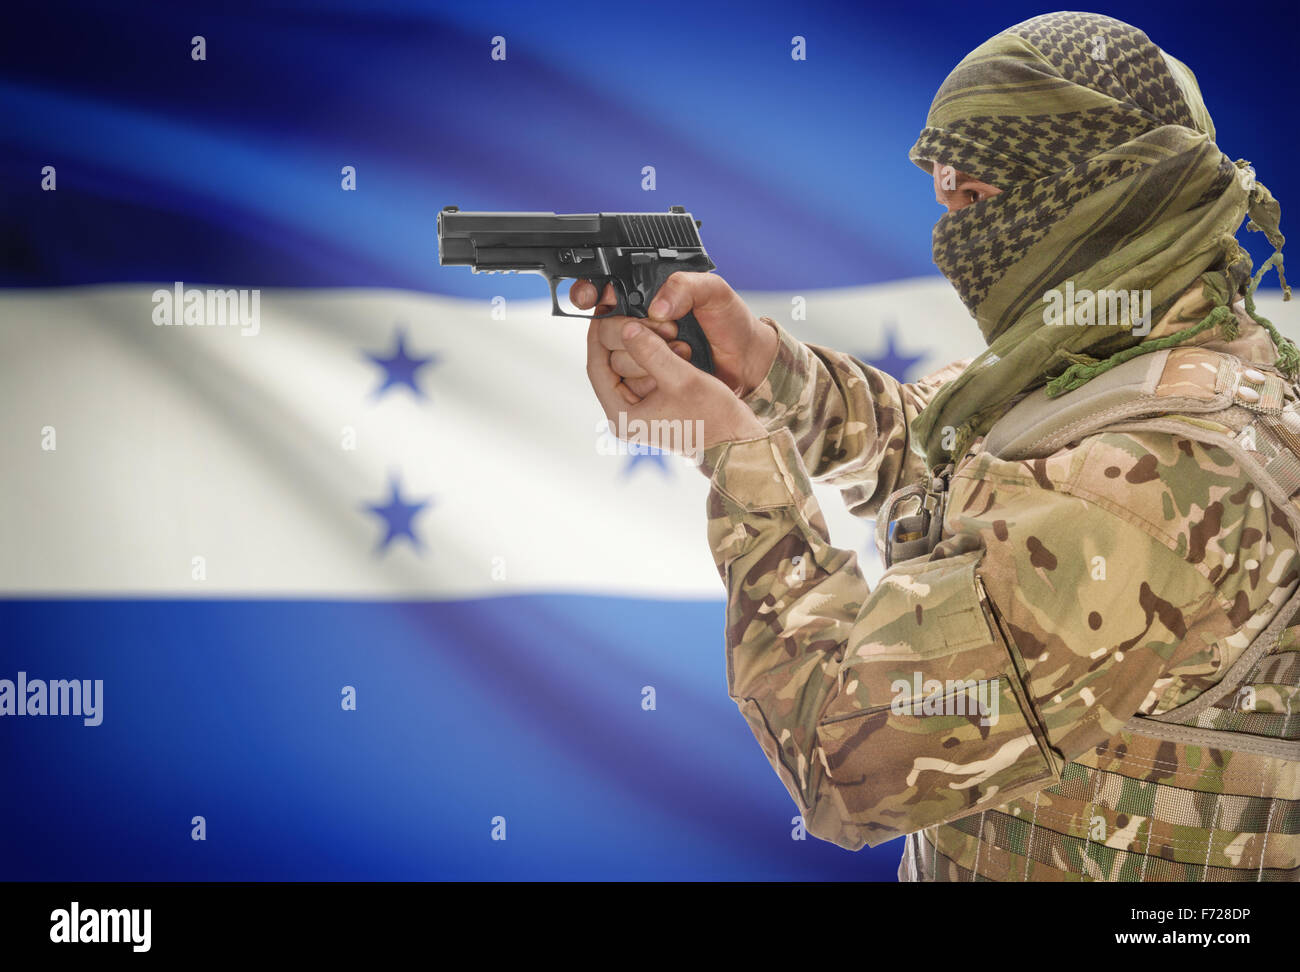 Male in muslim keffiyeh with gun in hand and national flag on background series - Honduras Stock Photo